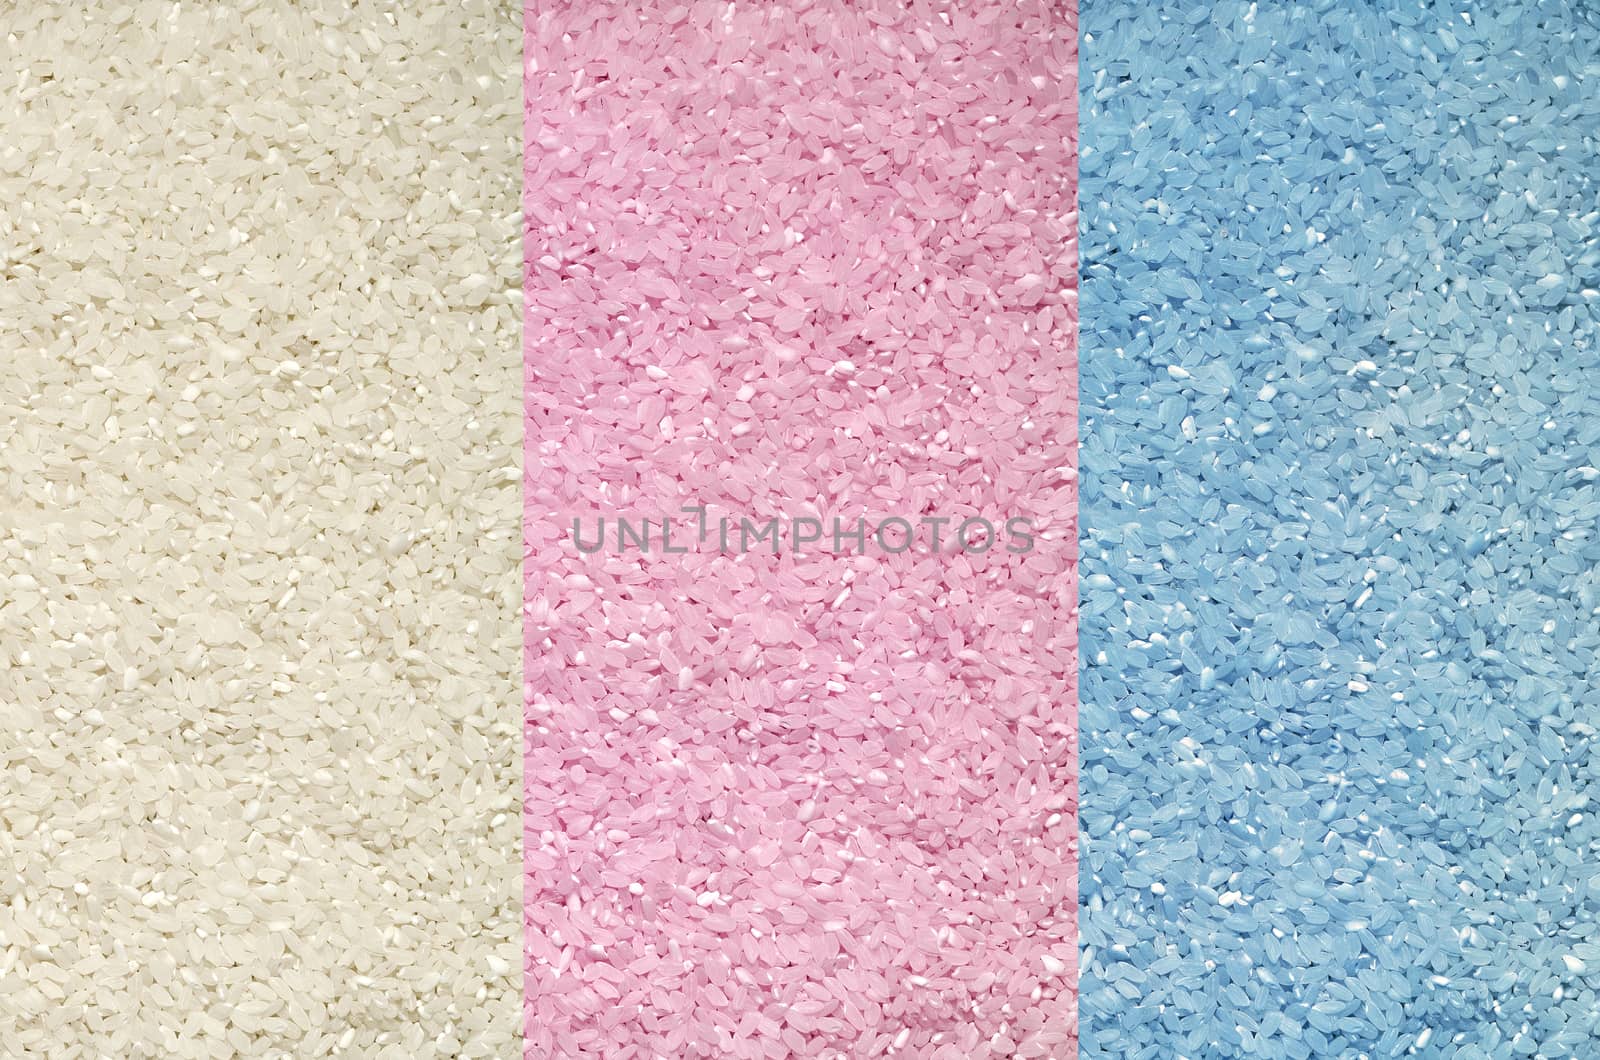 Textured background of colorful rice grains on the surface by Gaina